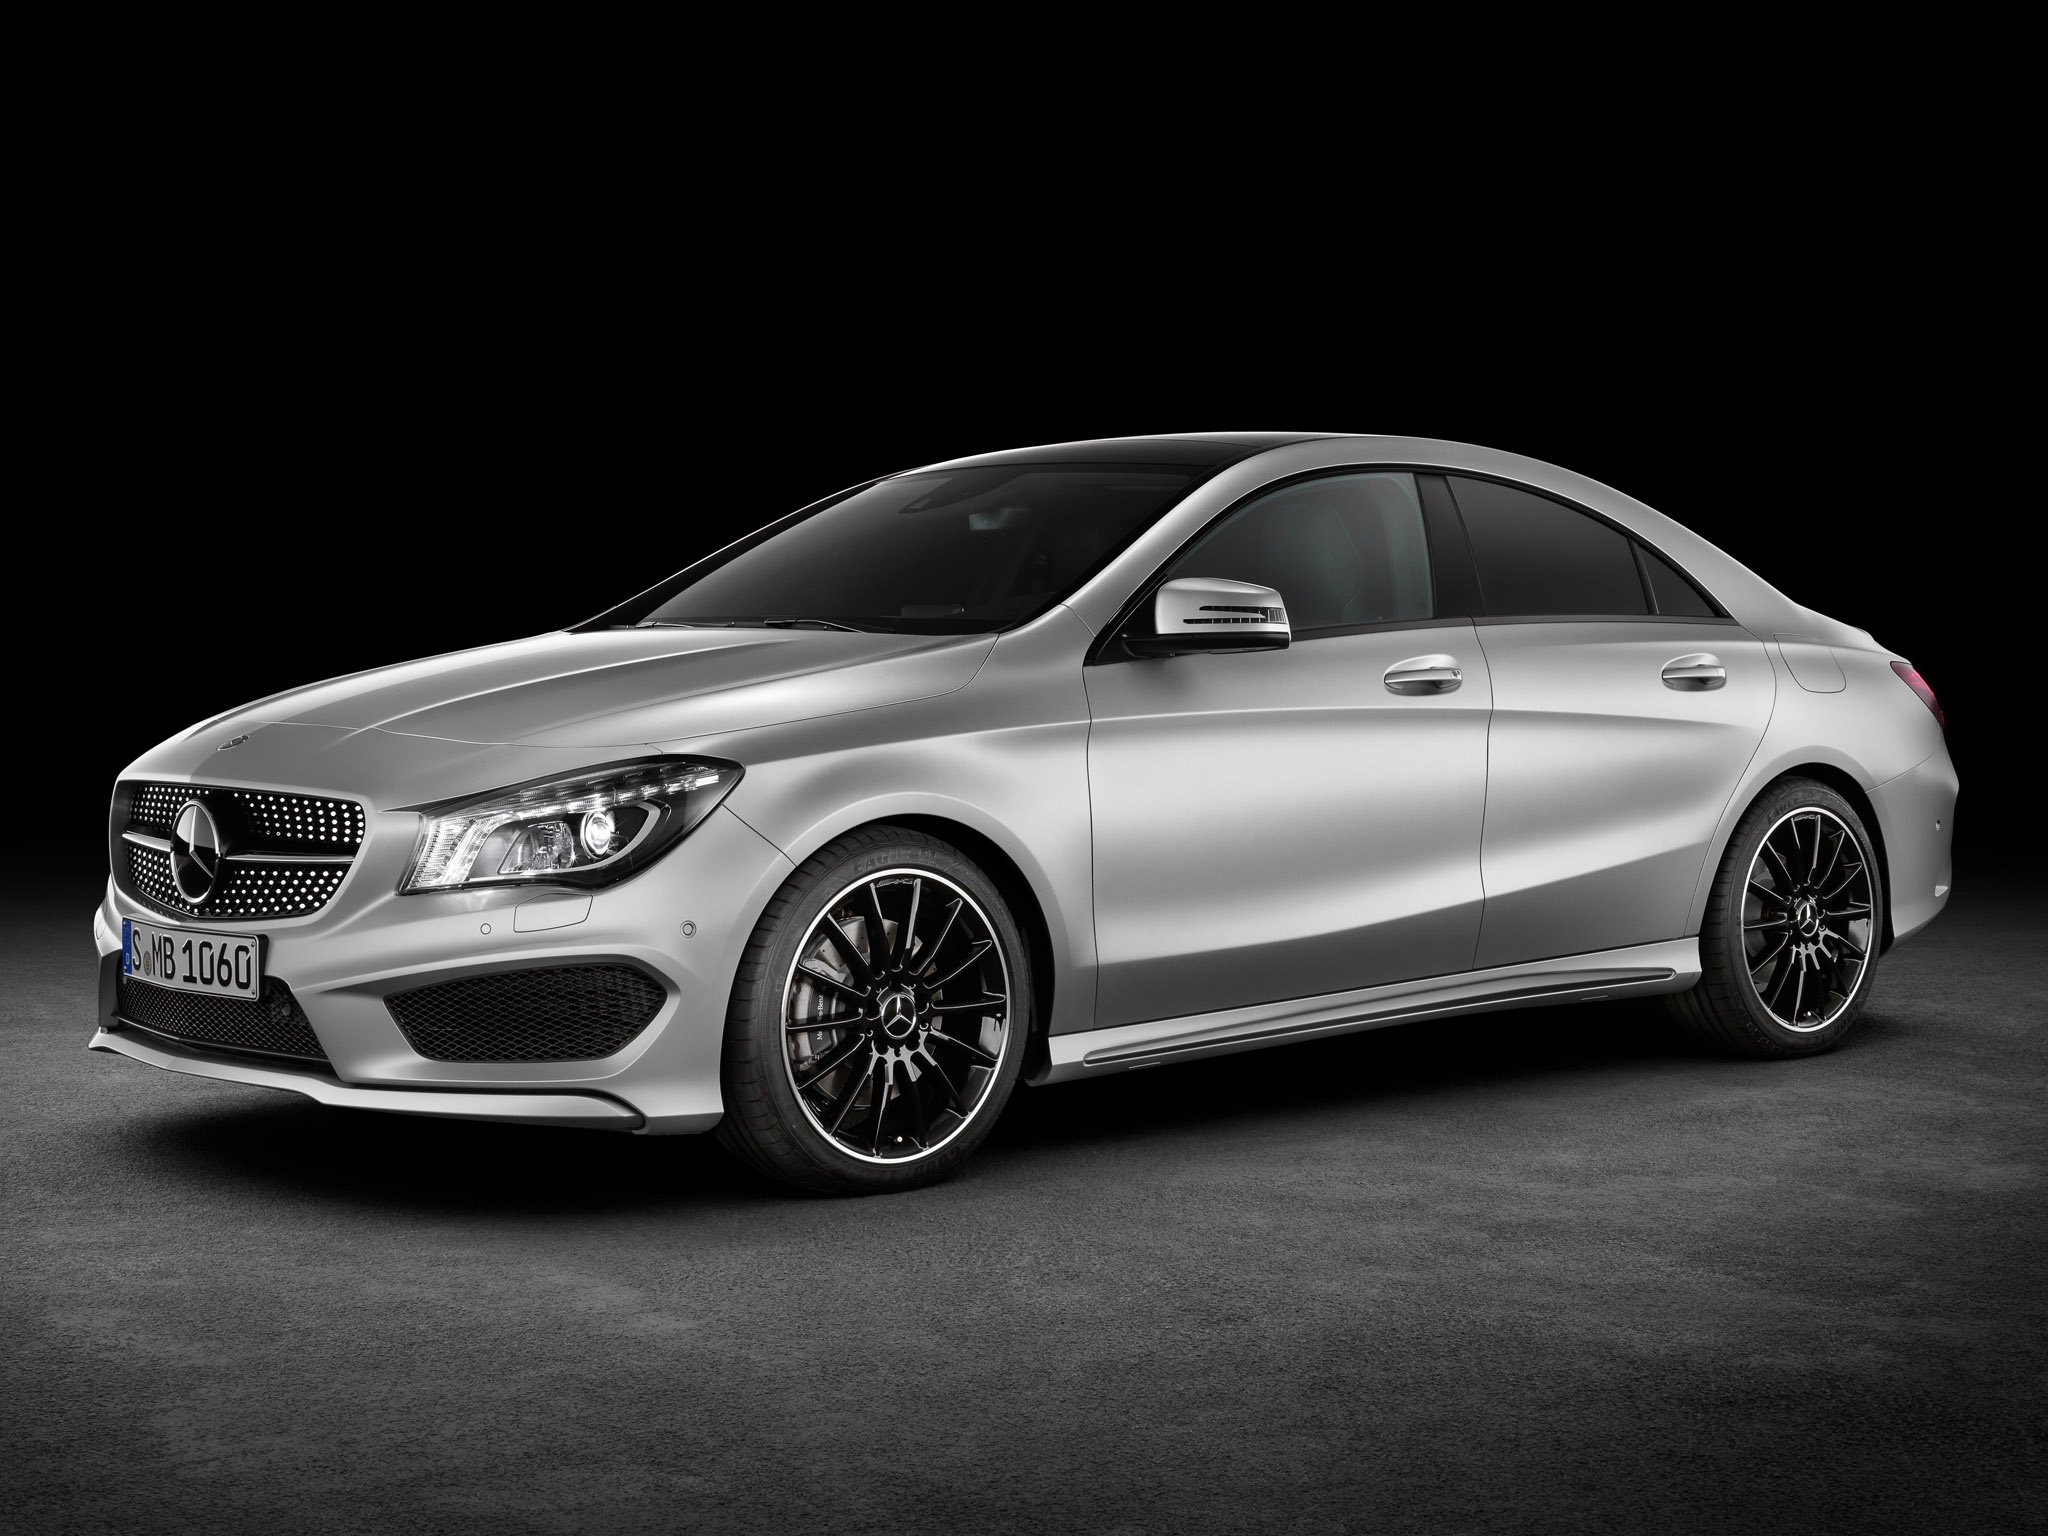 Car In Pictures Car Photo Gallery Mercedes Cla 250 Amg Sports